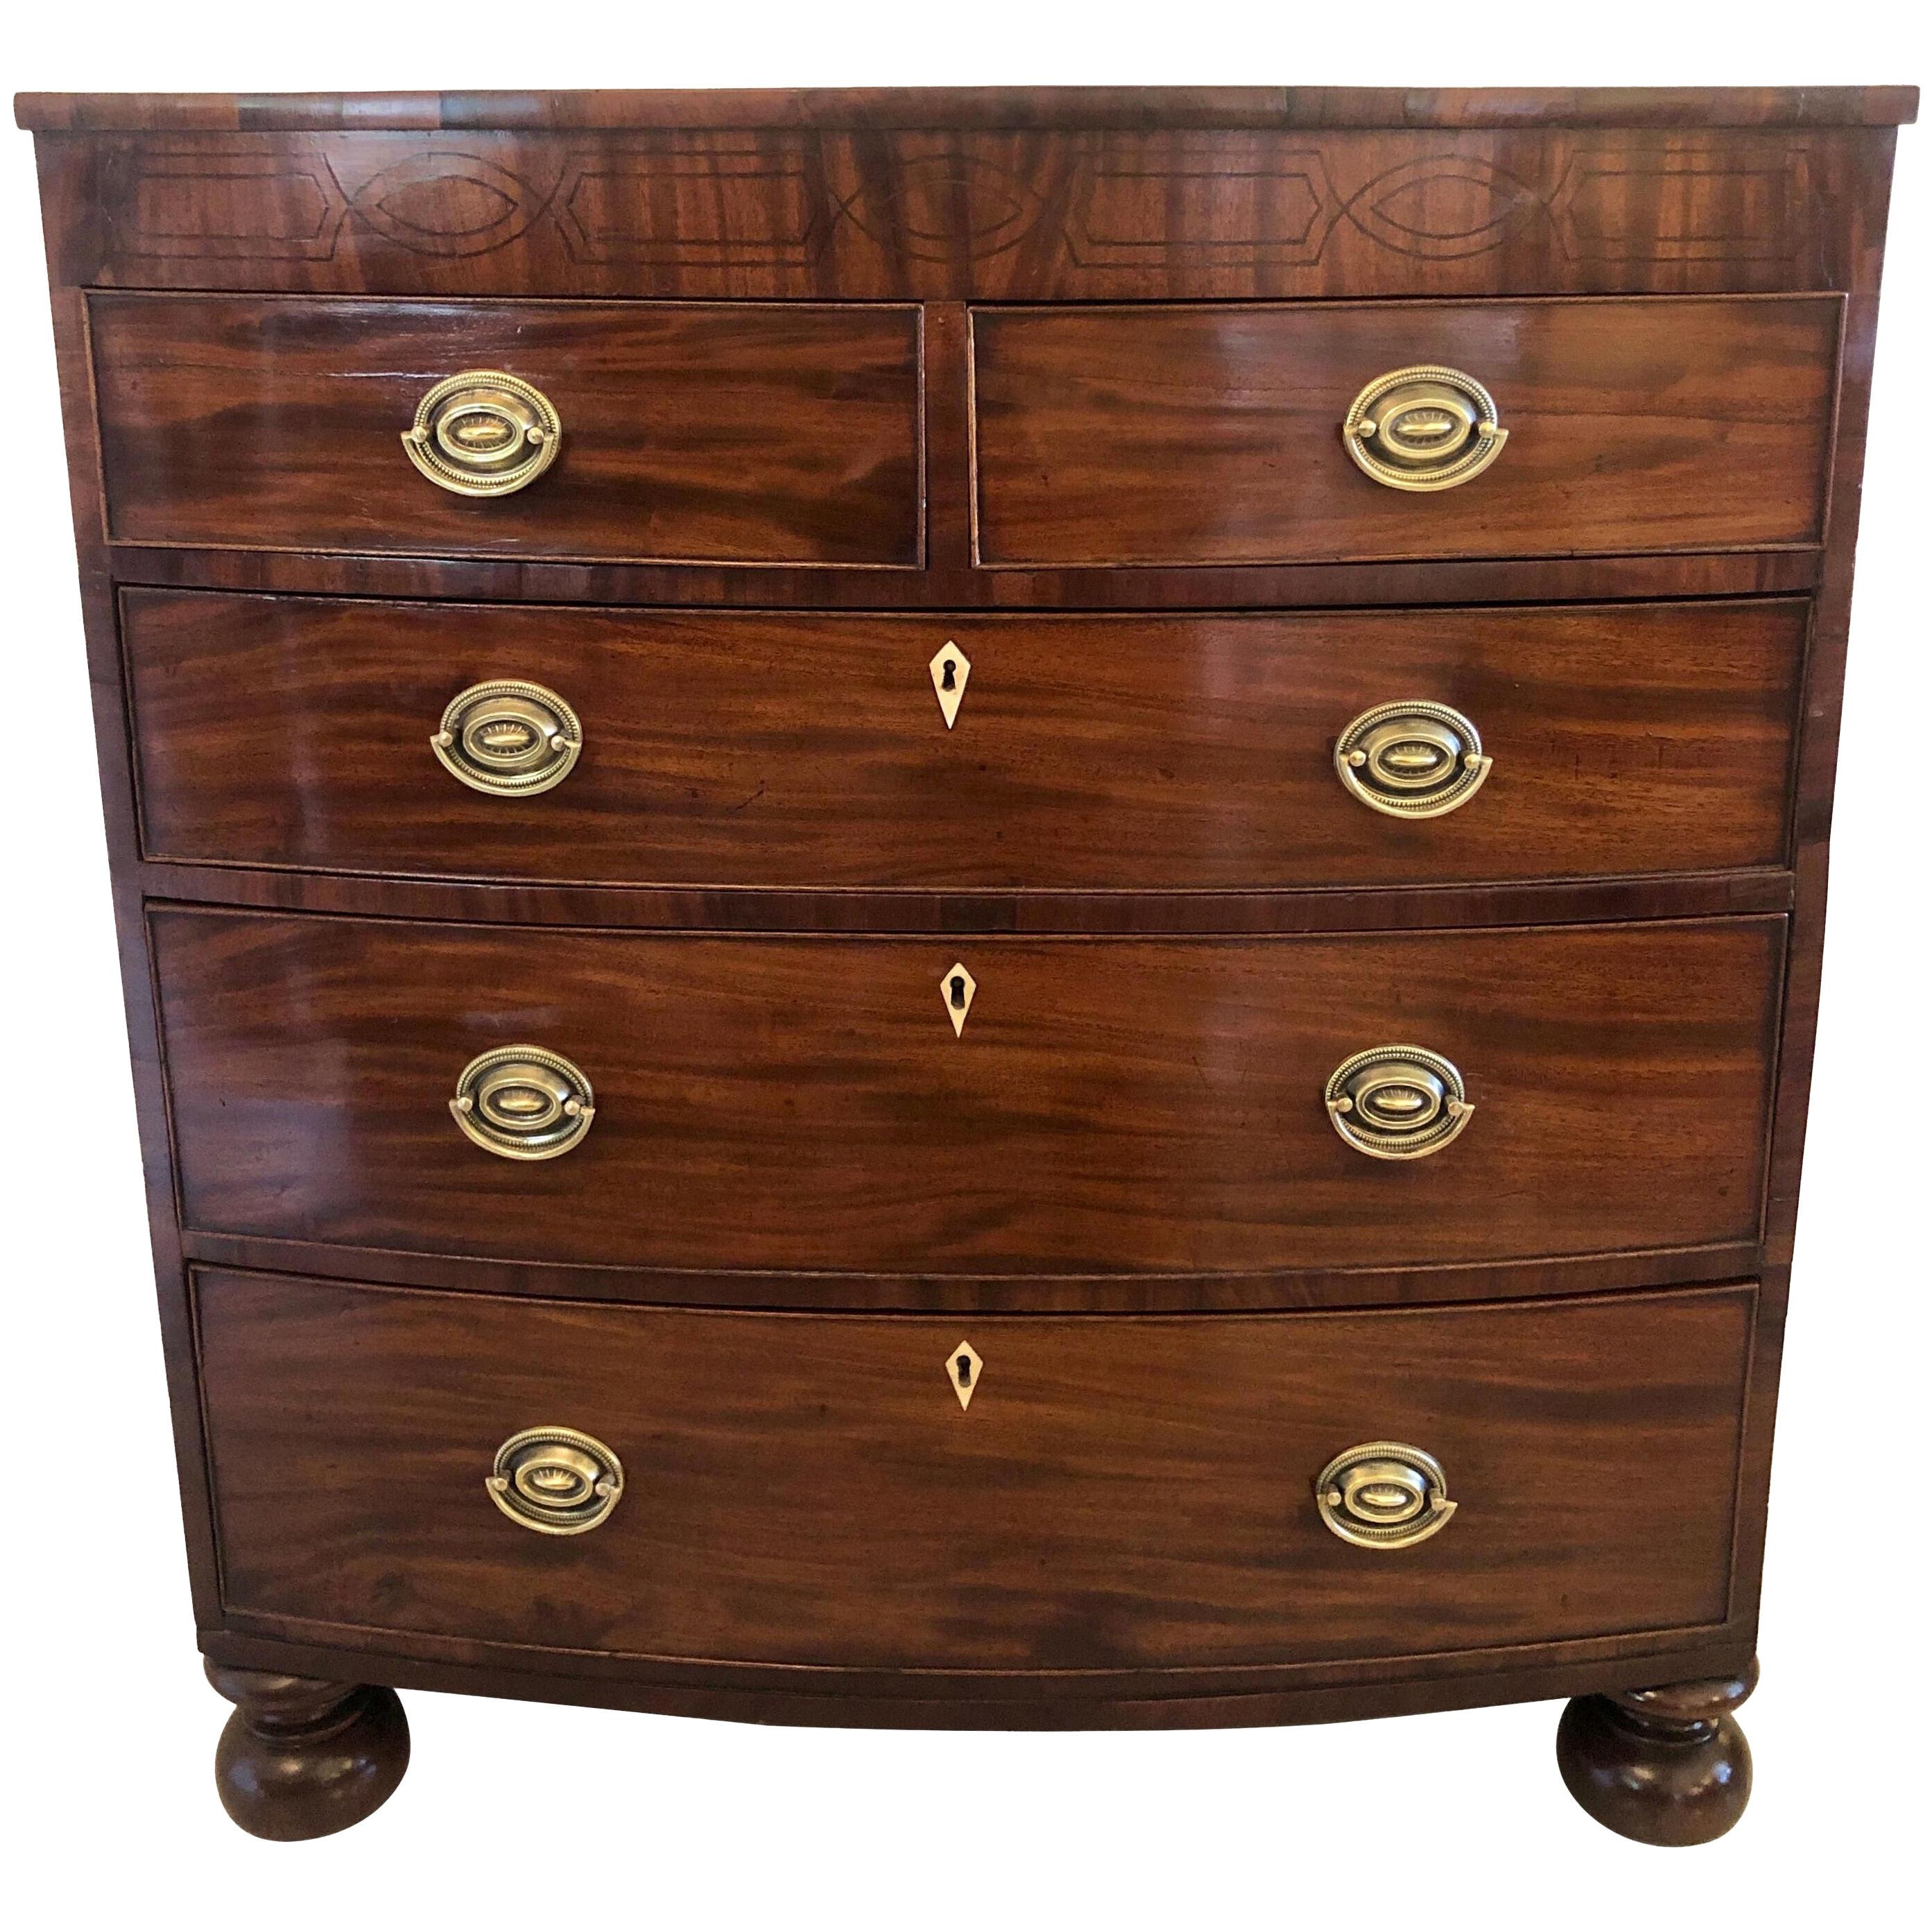 19th Century Antique Regency Mahogany Bow Fronted Chest of Drawers